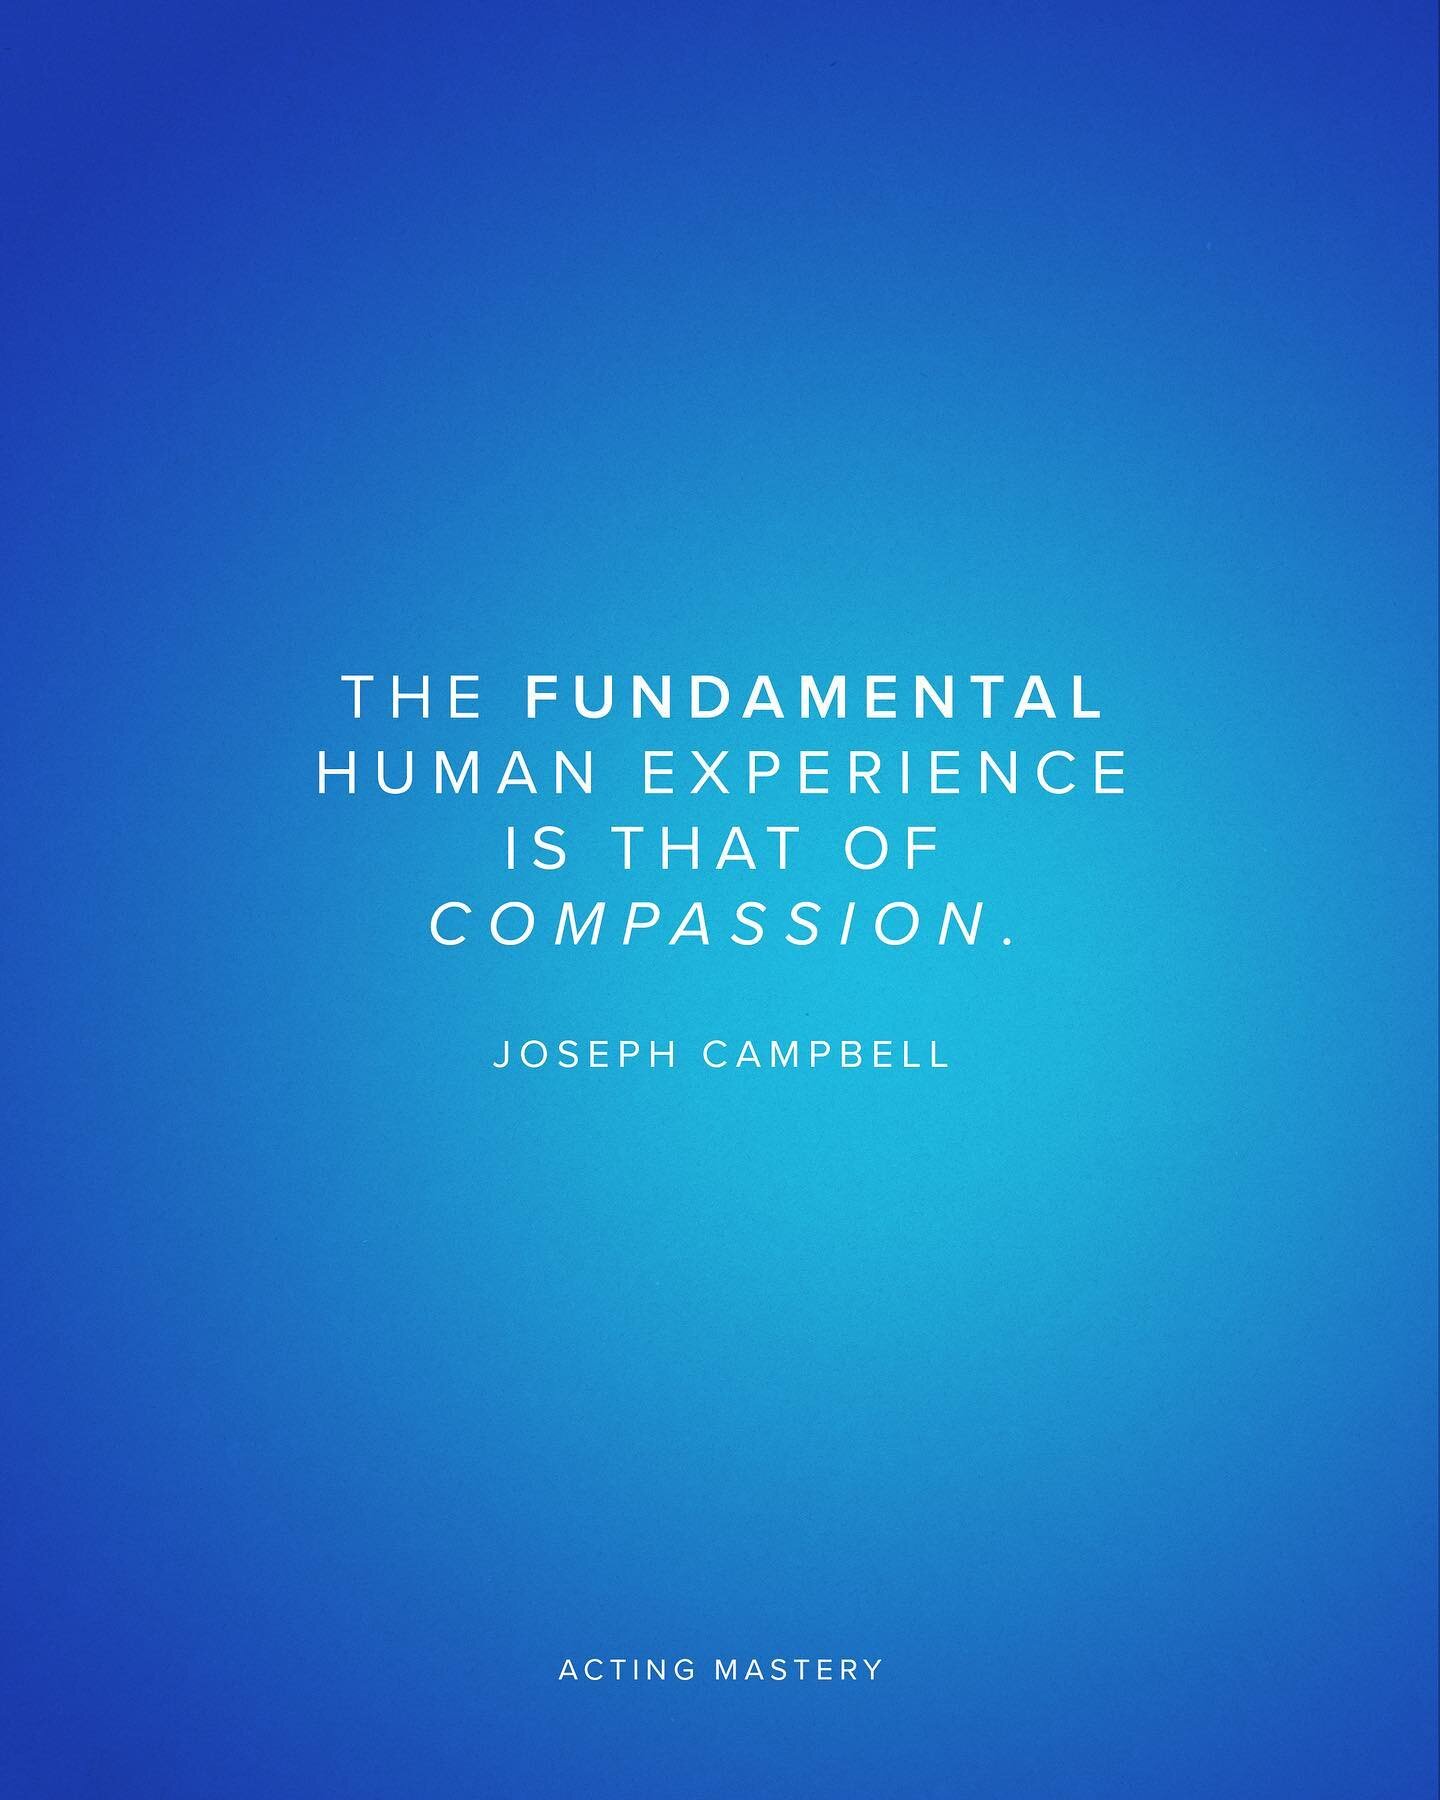 Manifesting a weekend full of compassion for ourselves and others, and resounding peace. What are your weekend plans?

#ActingMastery #Acting #Mastery #ActingClassesSydney #ActingSchoolSydney #Quote #Inspiration #JosephCampbell